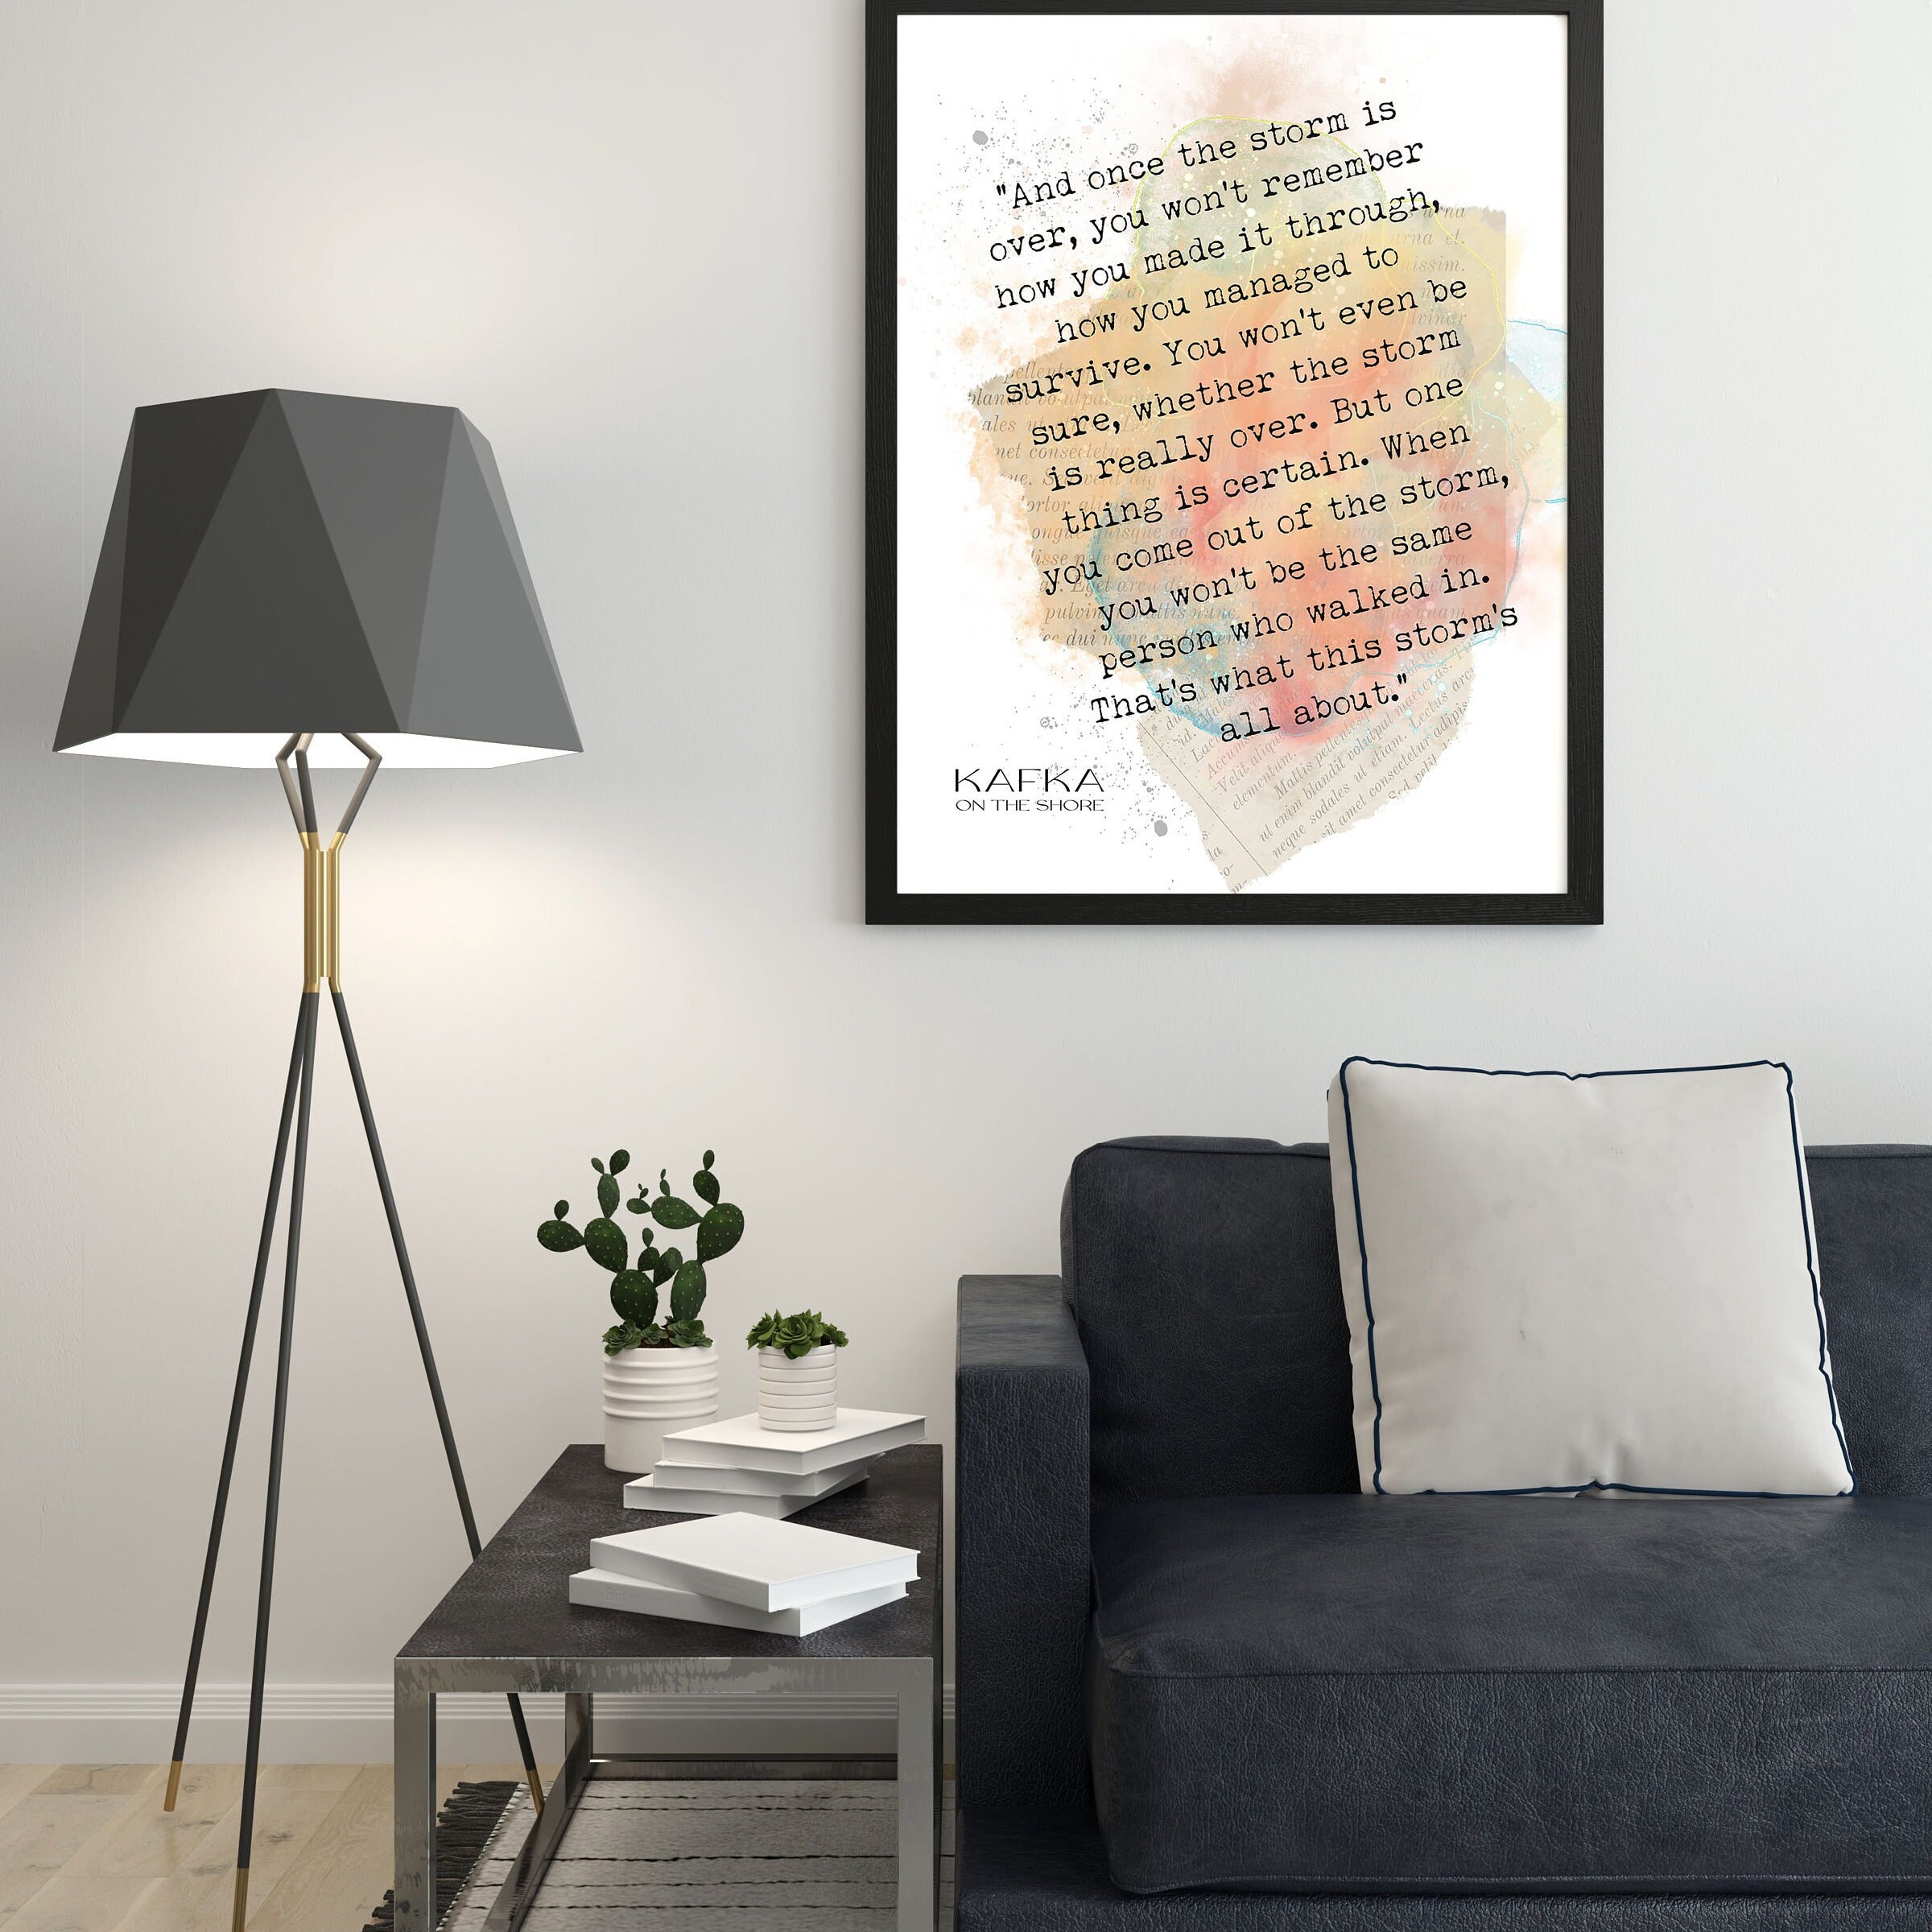 Haruki Murakami Quote Print Once The Storm Is Over, Kafka on the Shore Inspirational Quote Wall Art Prints Framed or Unframed